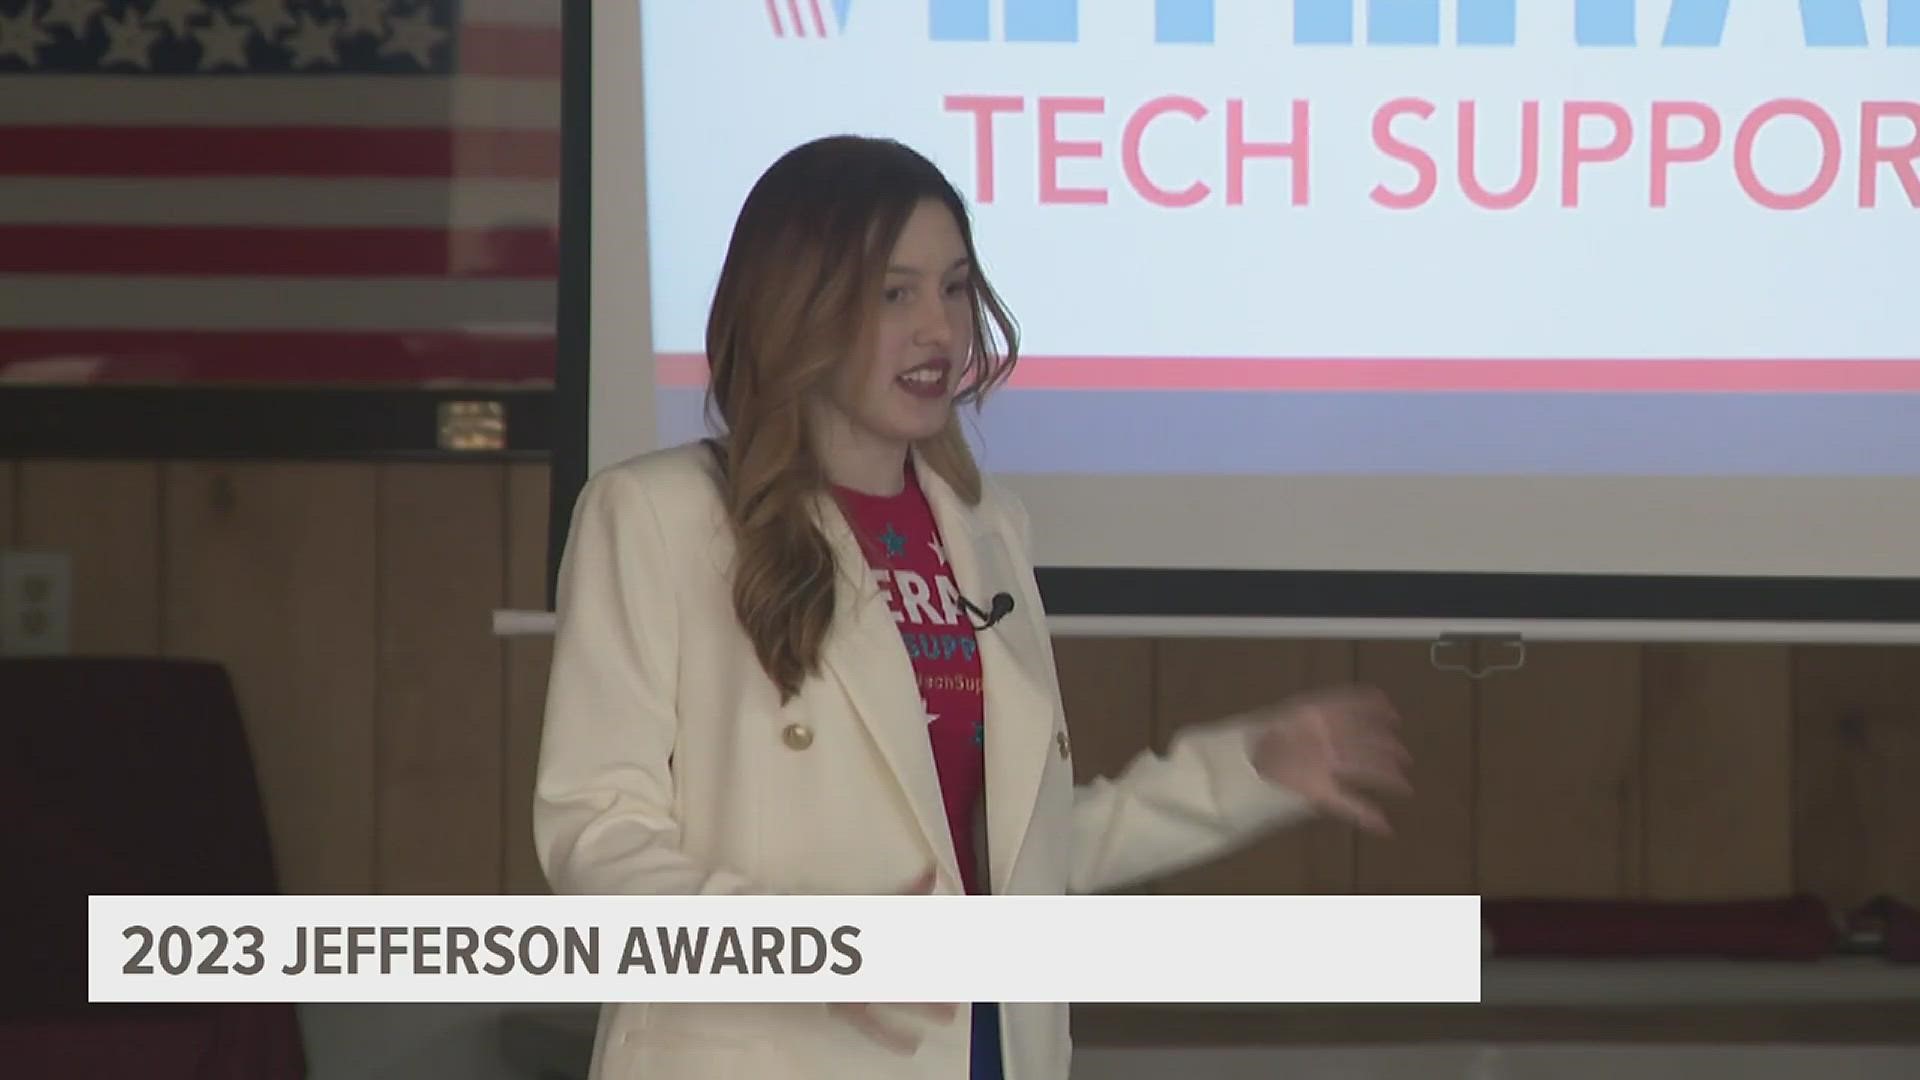 Abigail Johnson is 15, will graduate high school with an associates degree, is involved in more than a dozen activities at school, and teaches veterans tech skills.